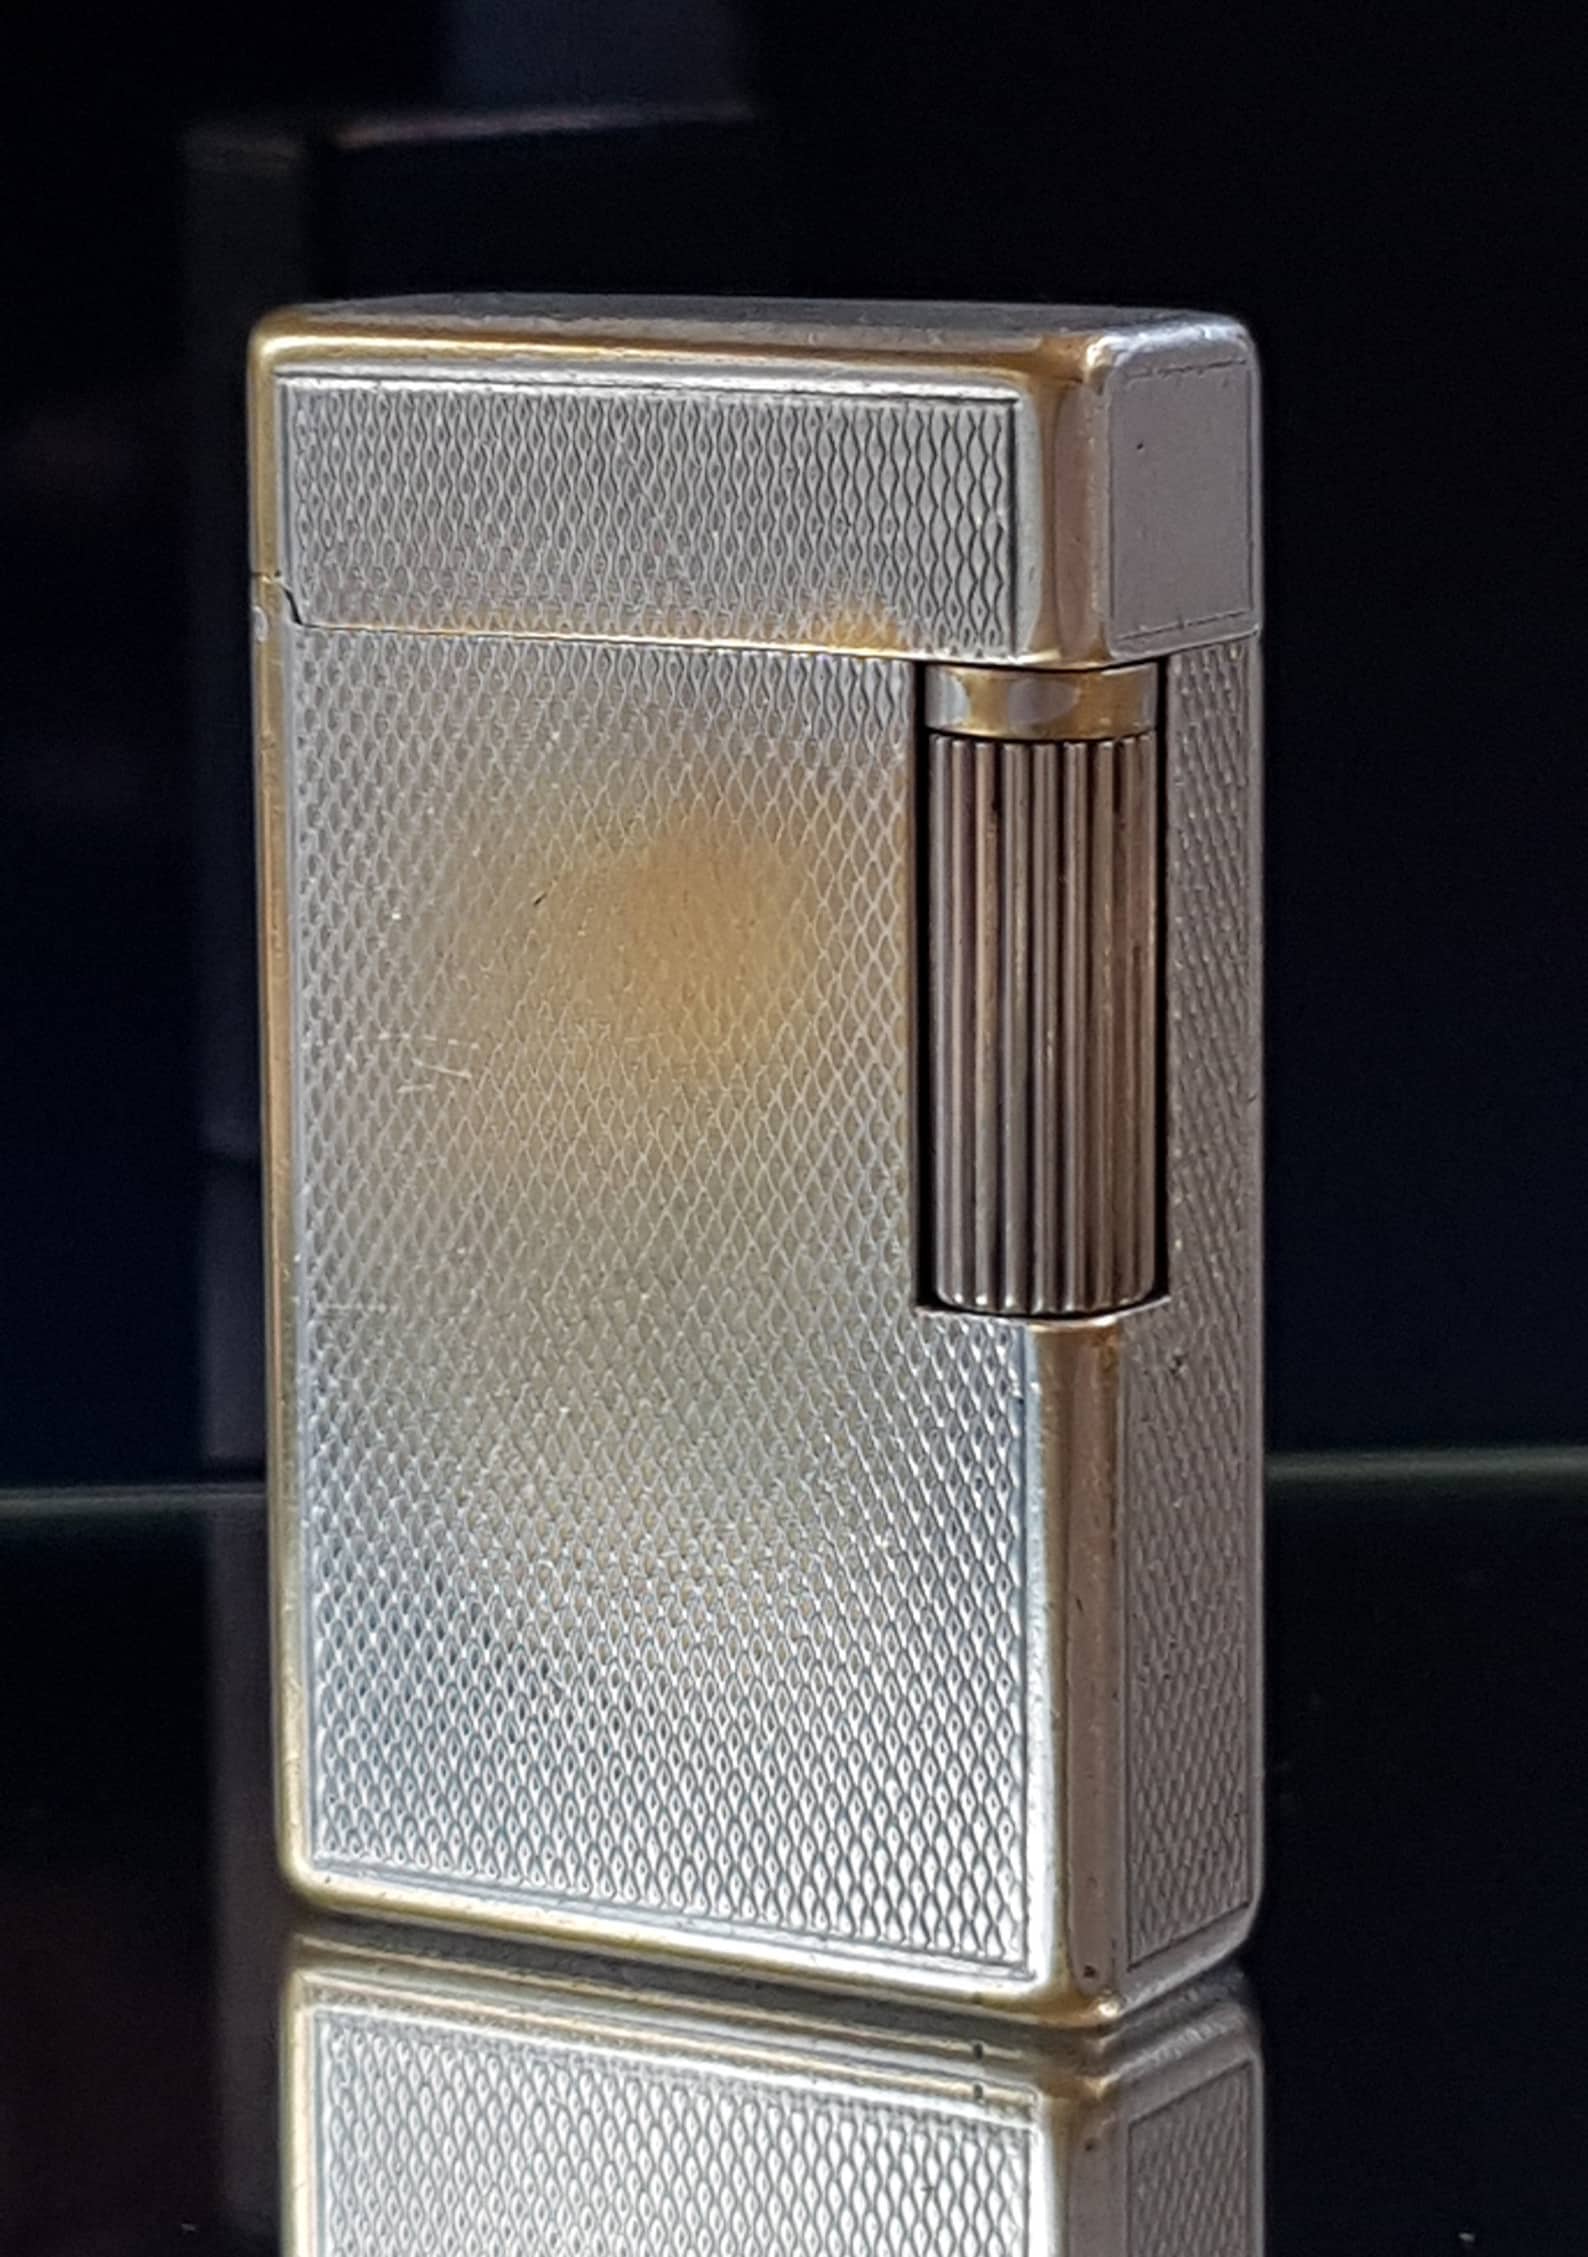 dating st dupont lighters